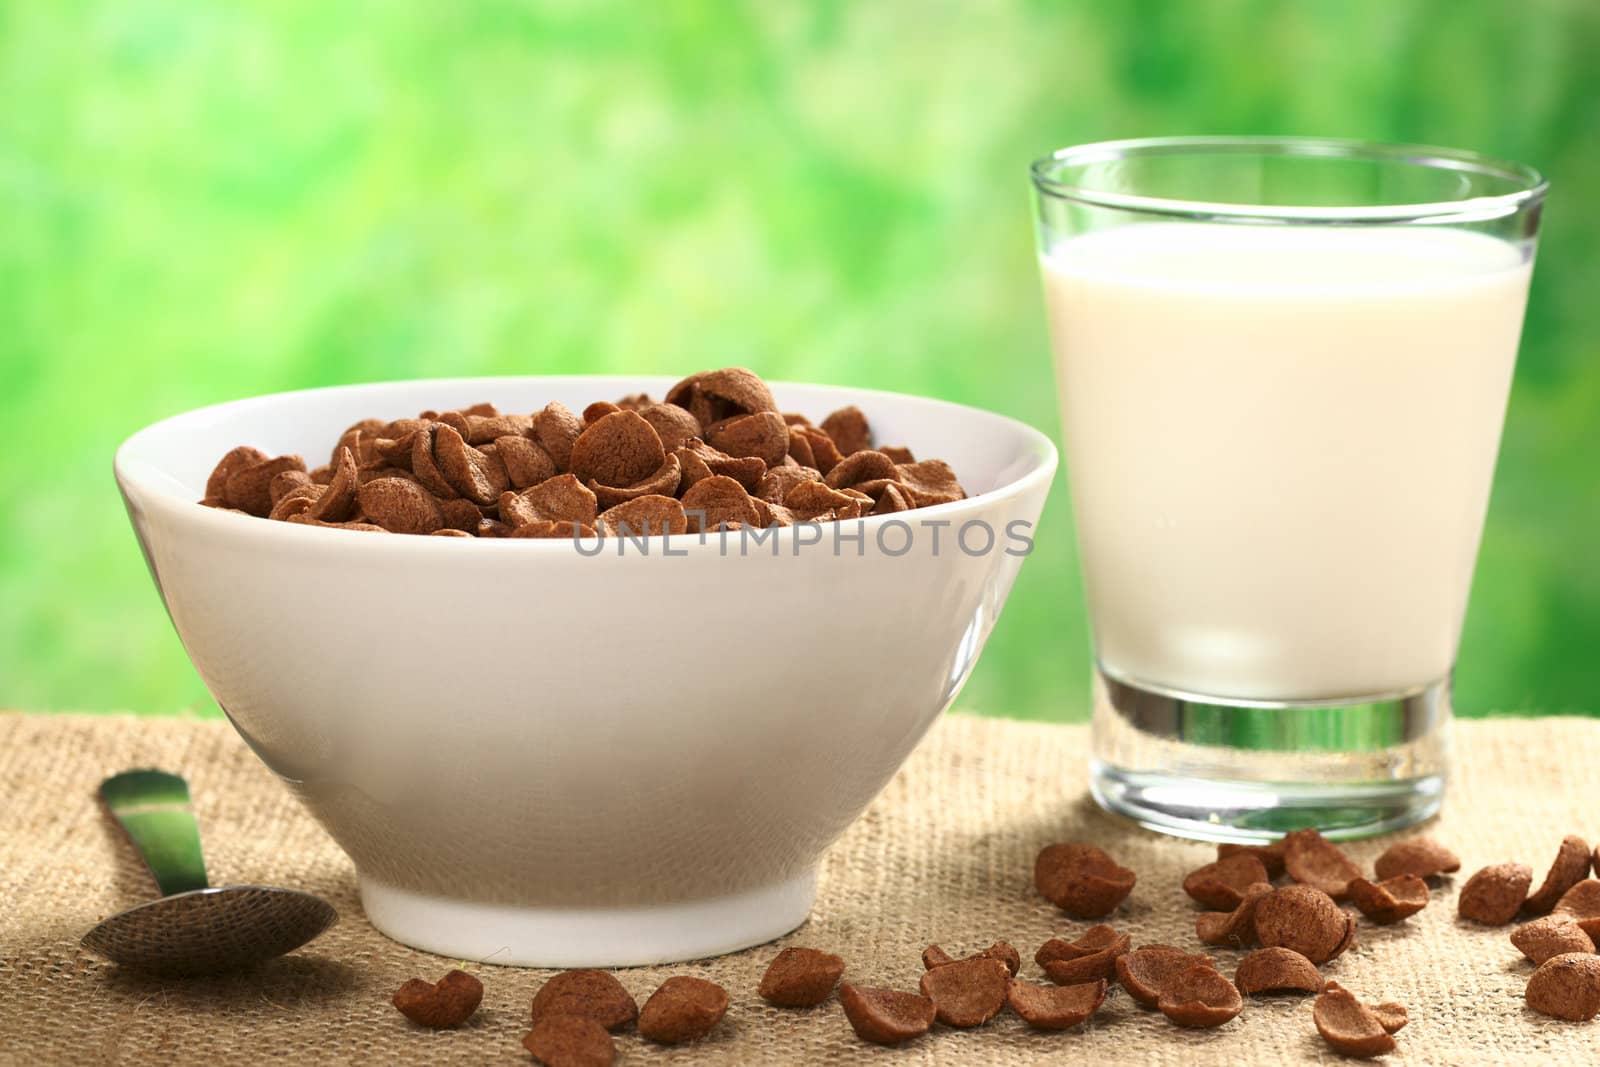 Chocolate wheat flake cereal in white bowl with a glass of milk (Selective Focus, Focus one third into the bowl of cereals)